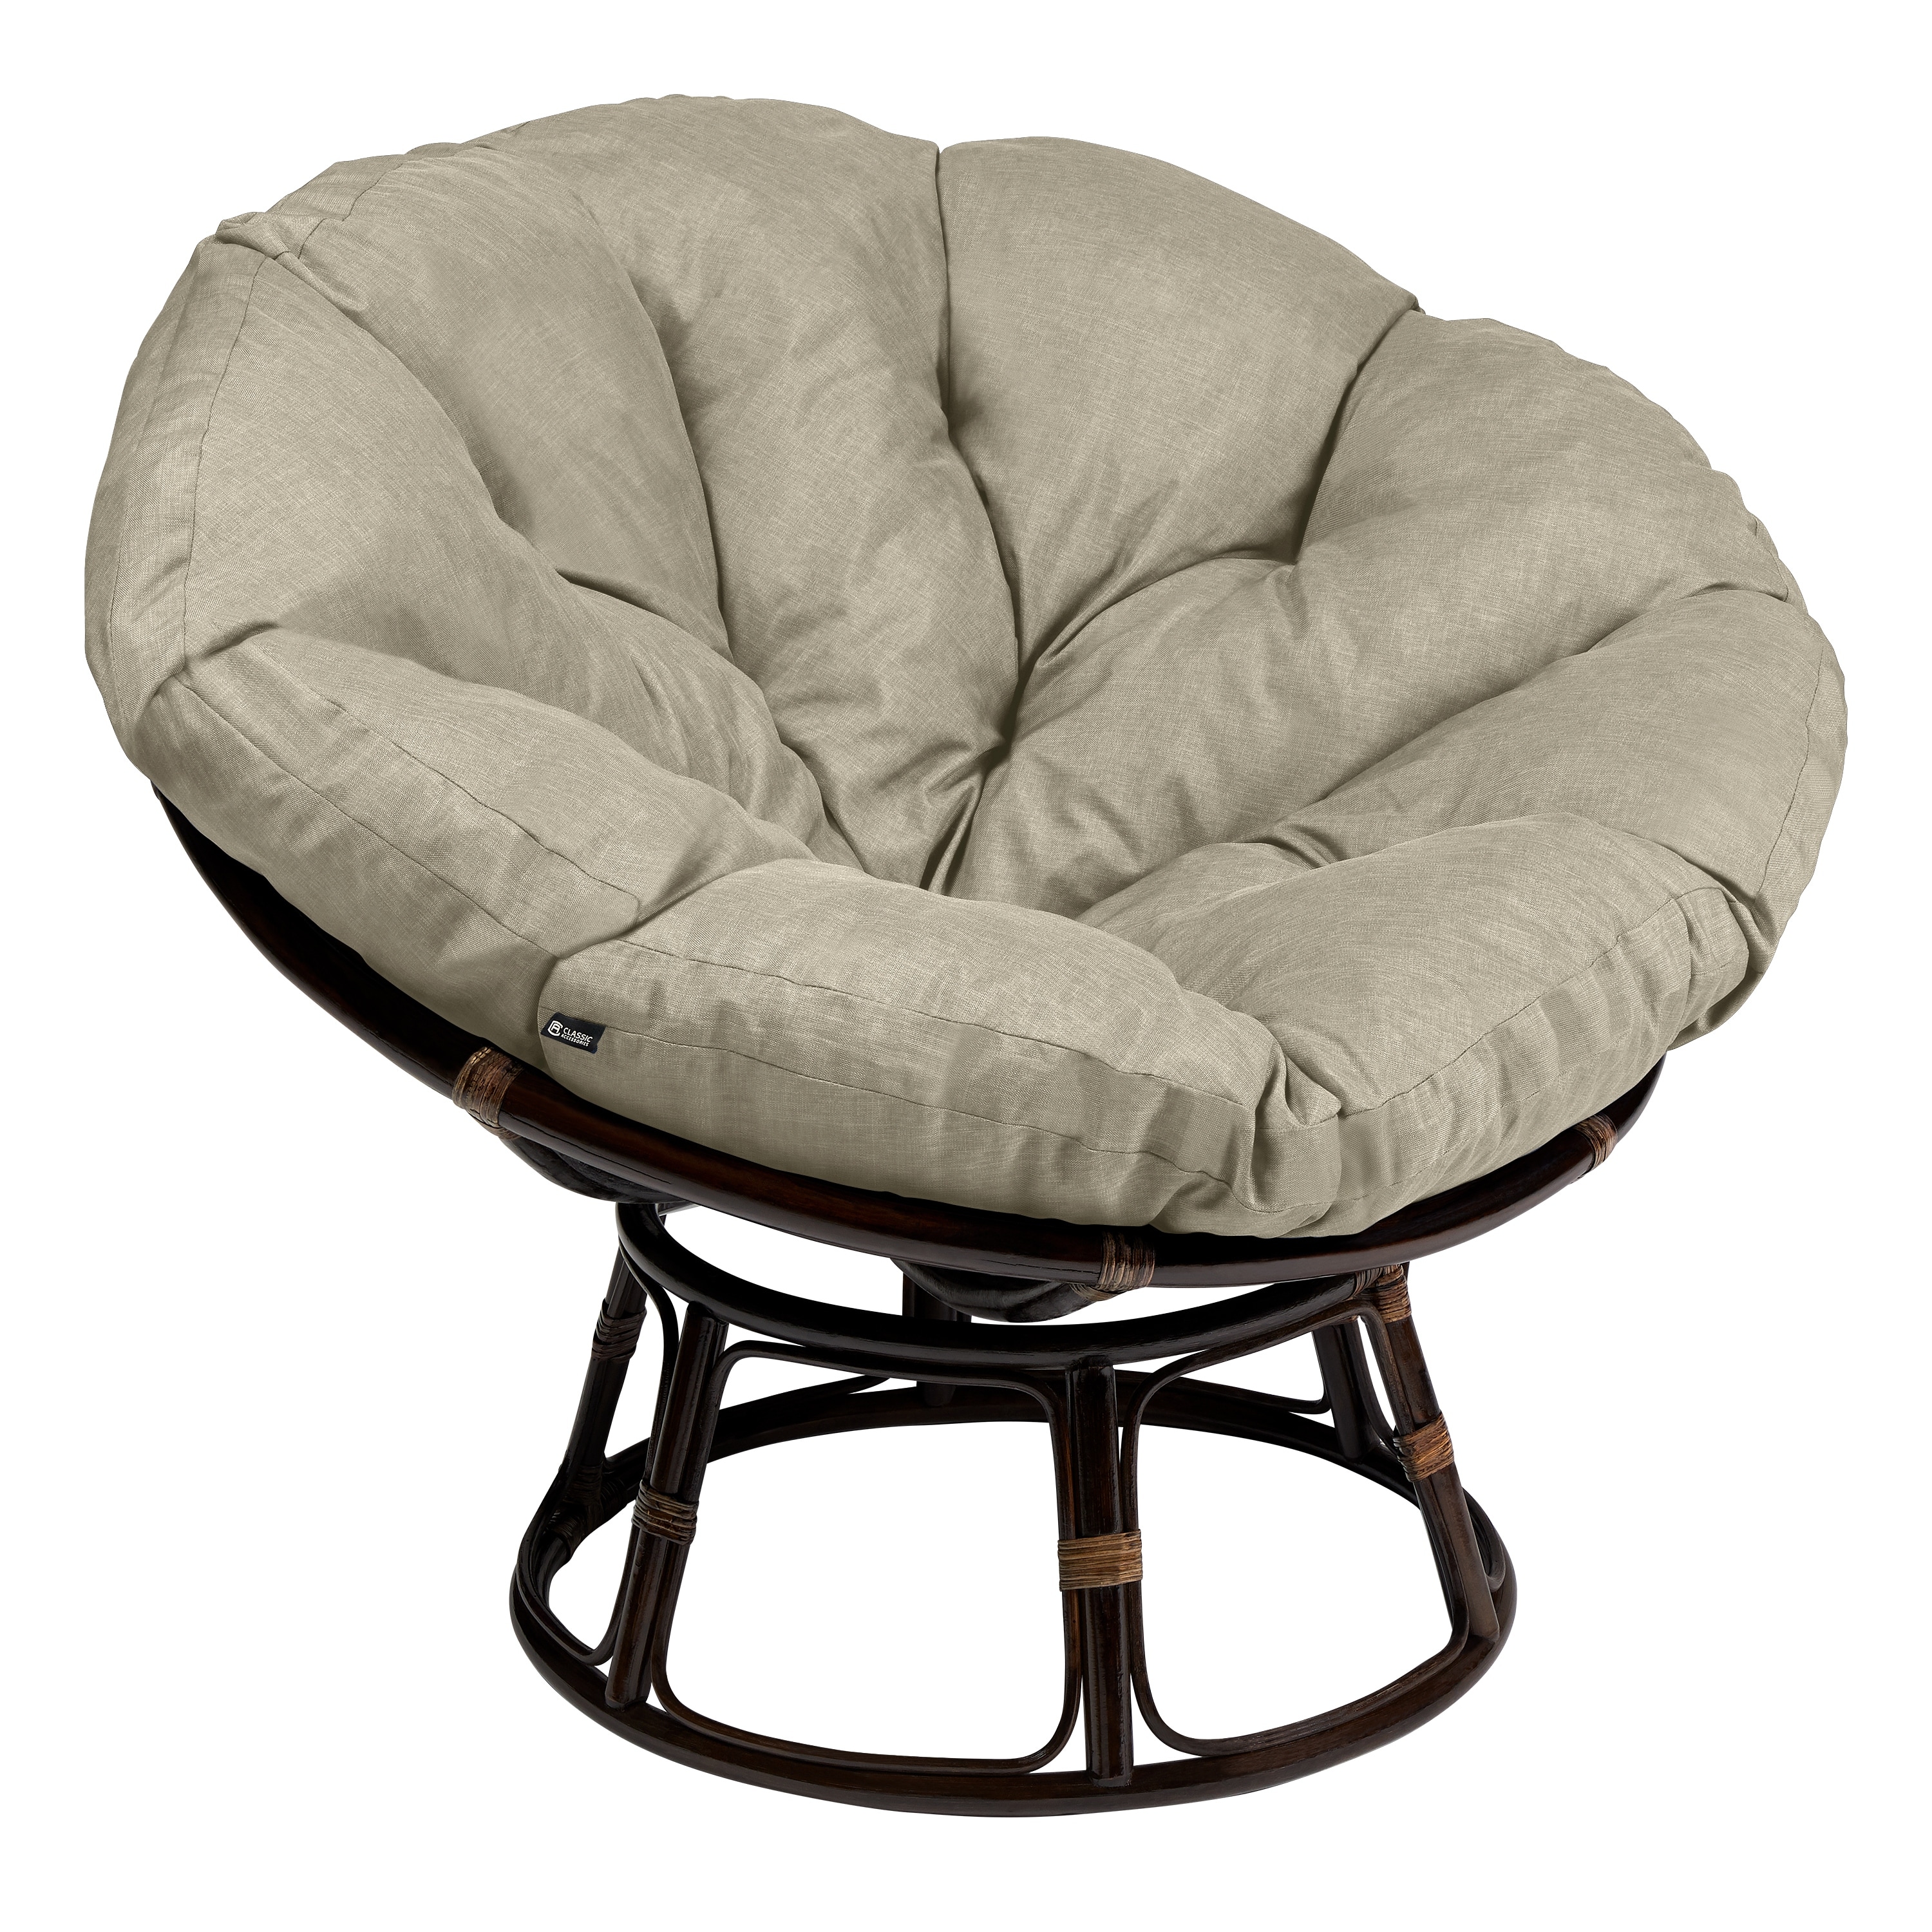 classic accessories montlake waterresistant 50 inch papasan cushion chair  is not included